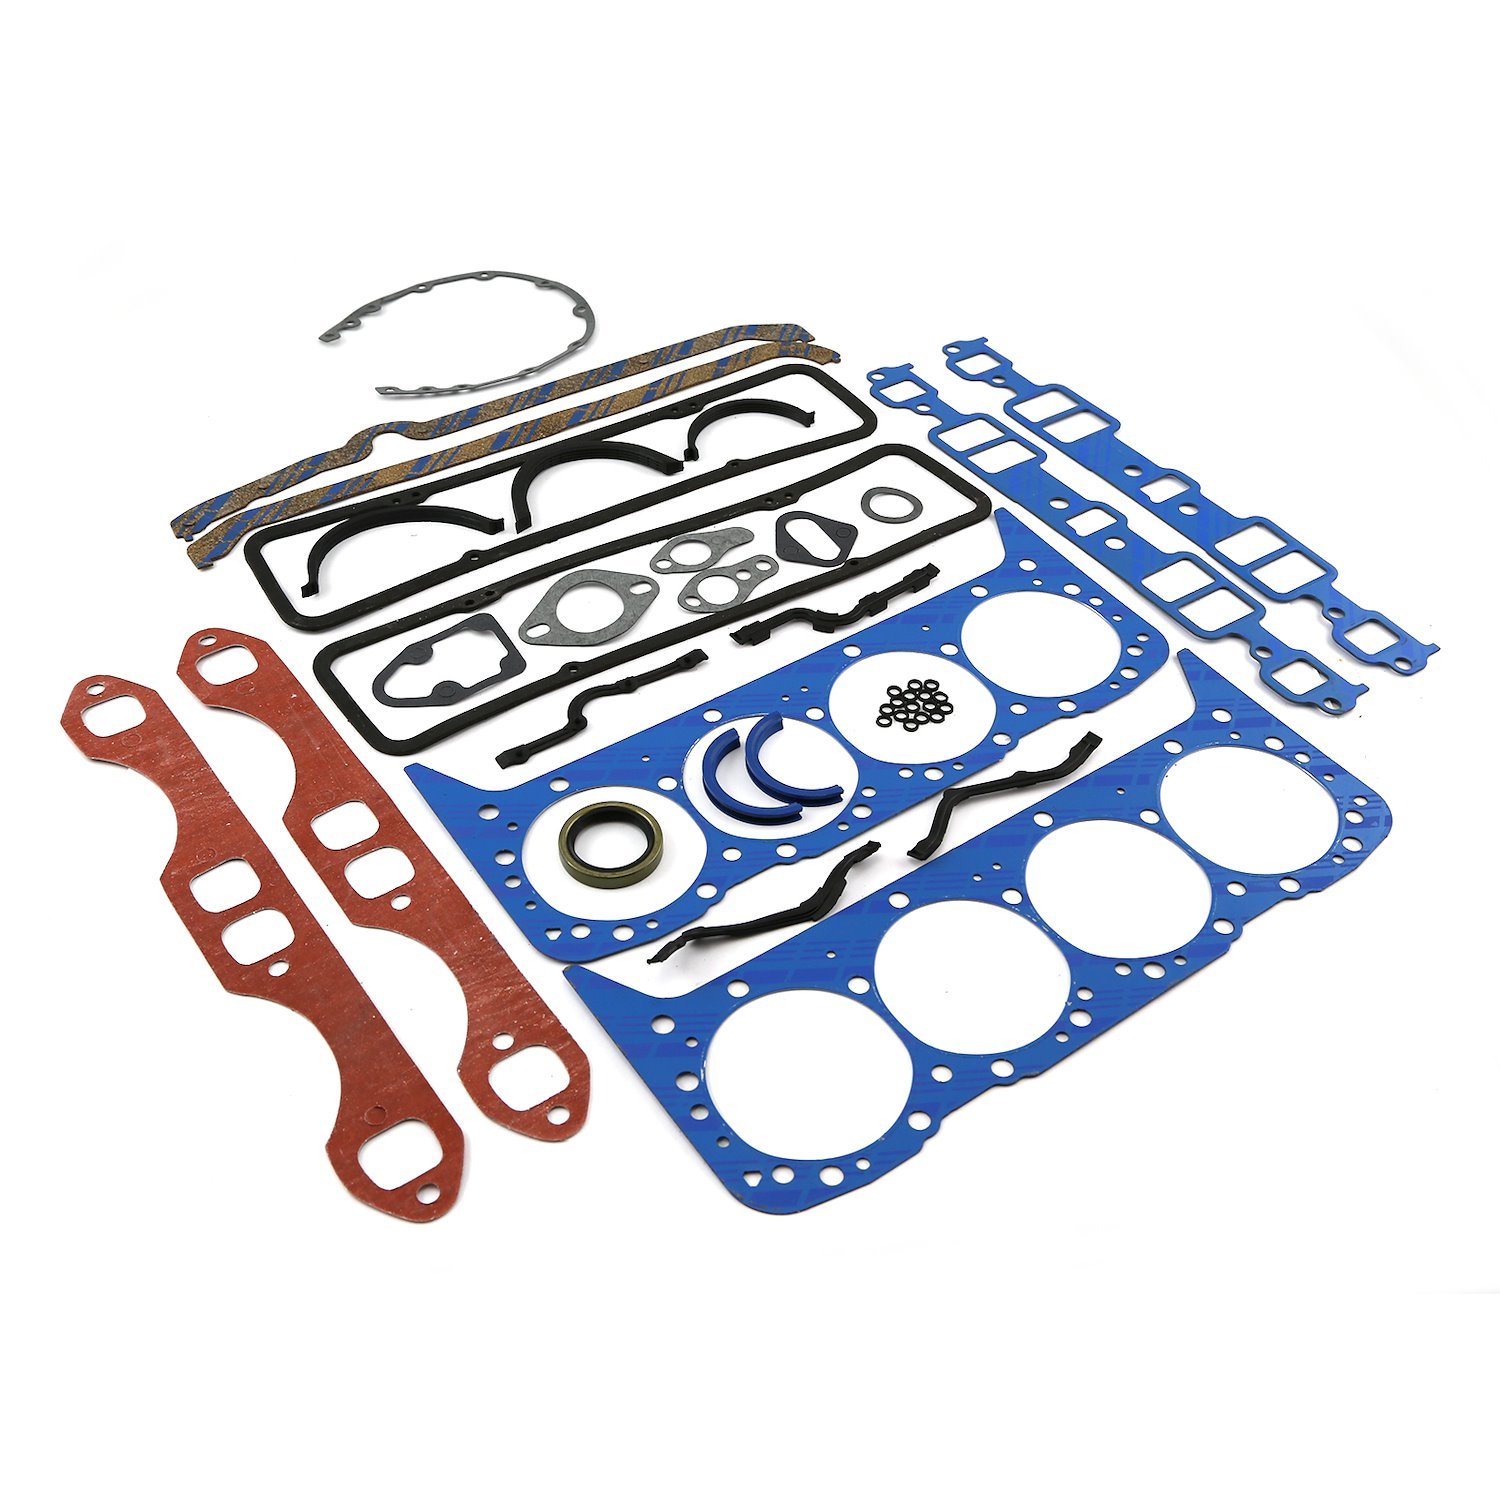 PCE347.1006 Full Rebuild Complete Engine Gasket Kit for Small Block Chevy 350